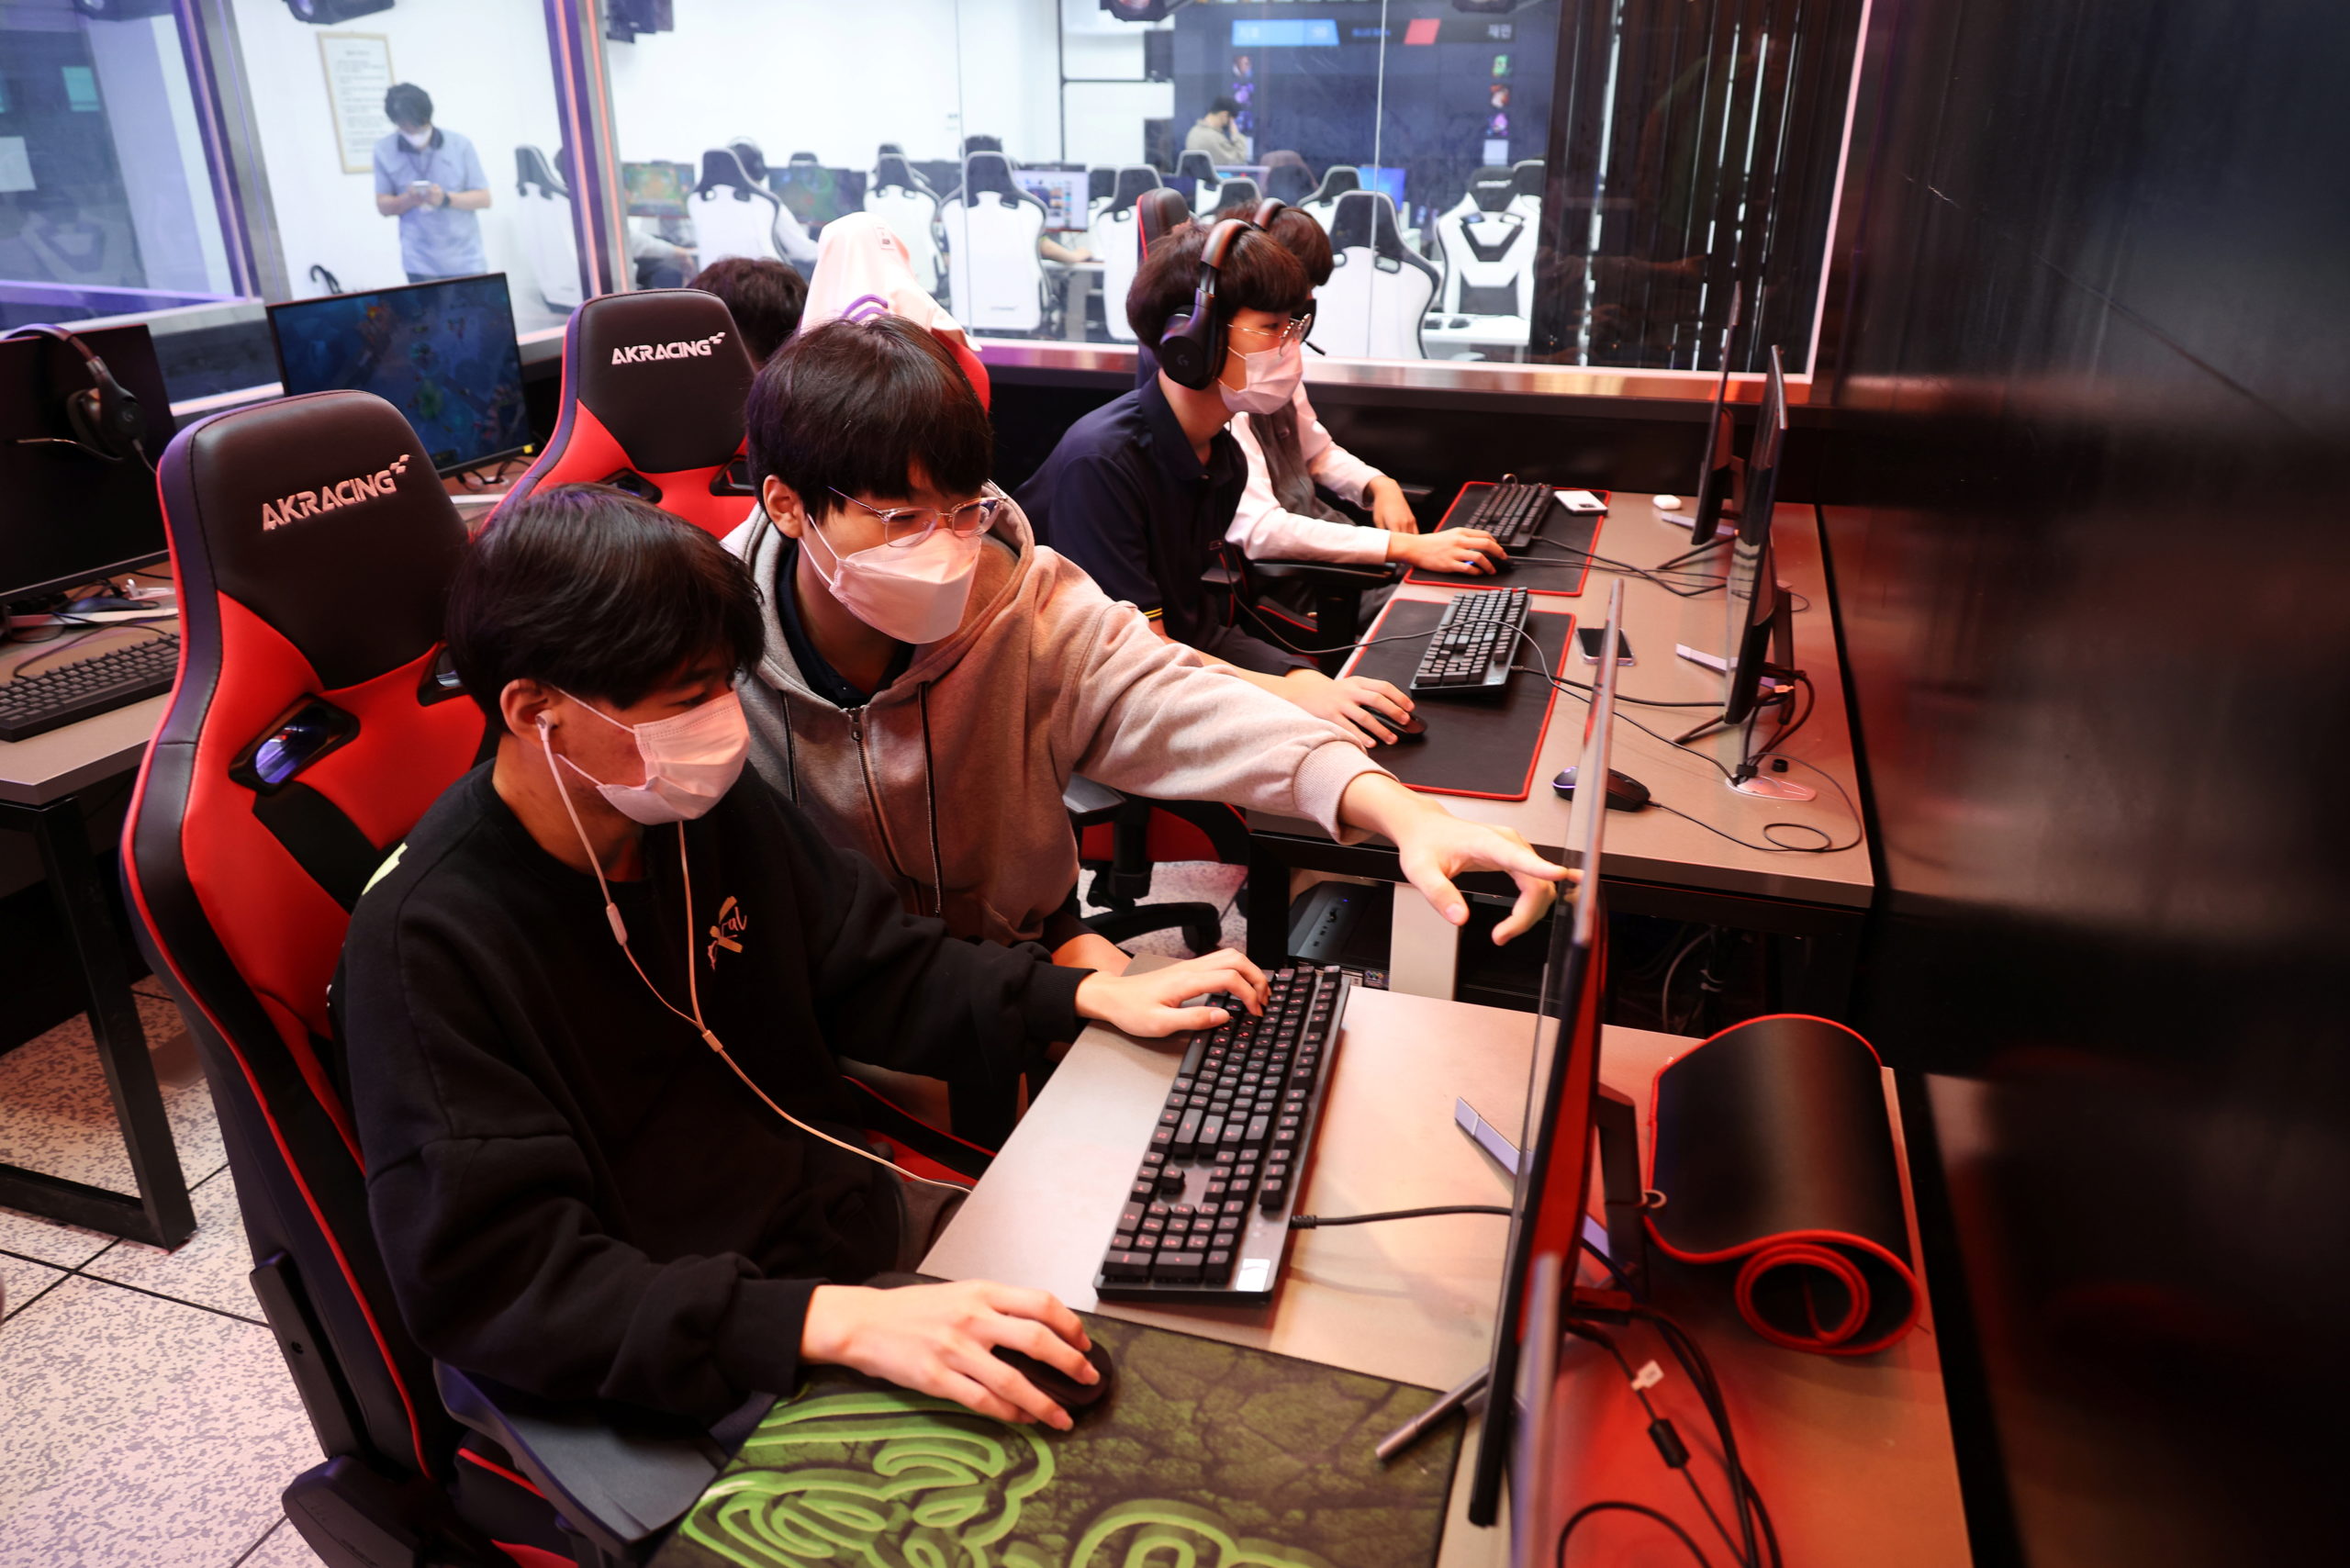 Yoon Ki-chan, majoring in esports, guides a friend as they play League of Legends during a class at Eunpyeong Meditech high school in Seoul, South Korea, October 7, 2021. Picture taken on October 7, 2021. 